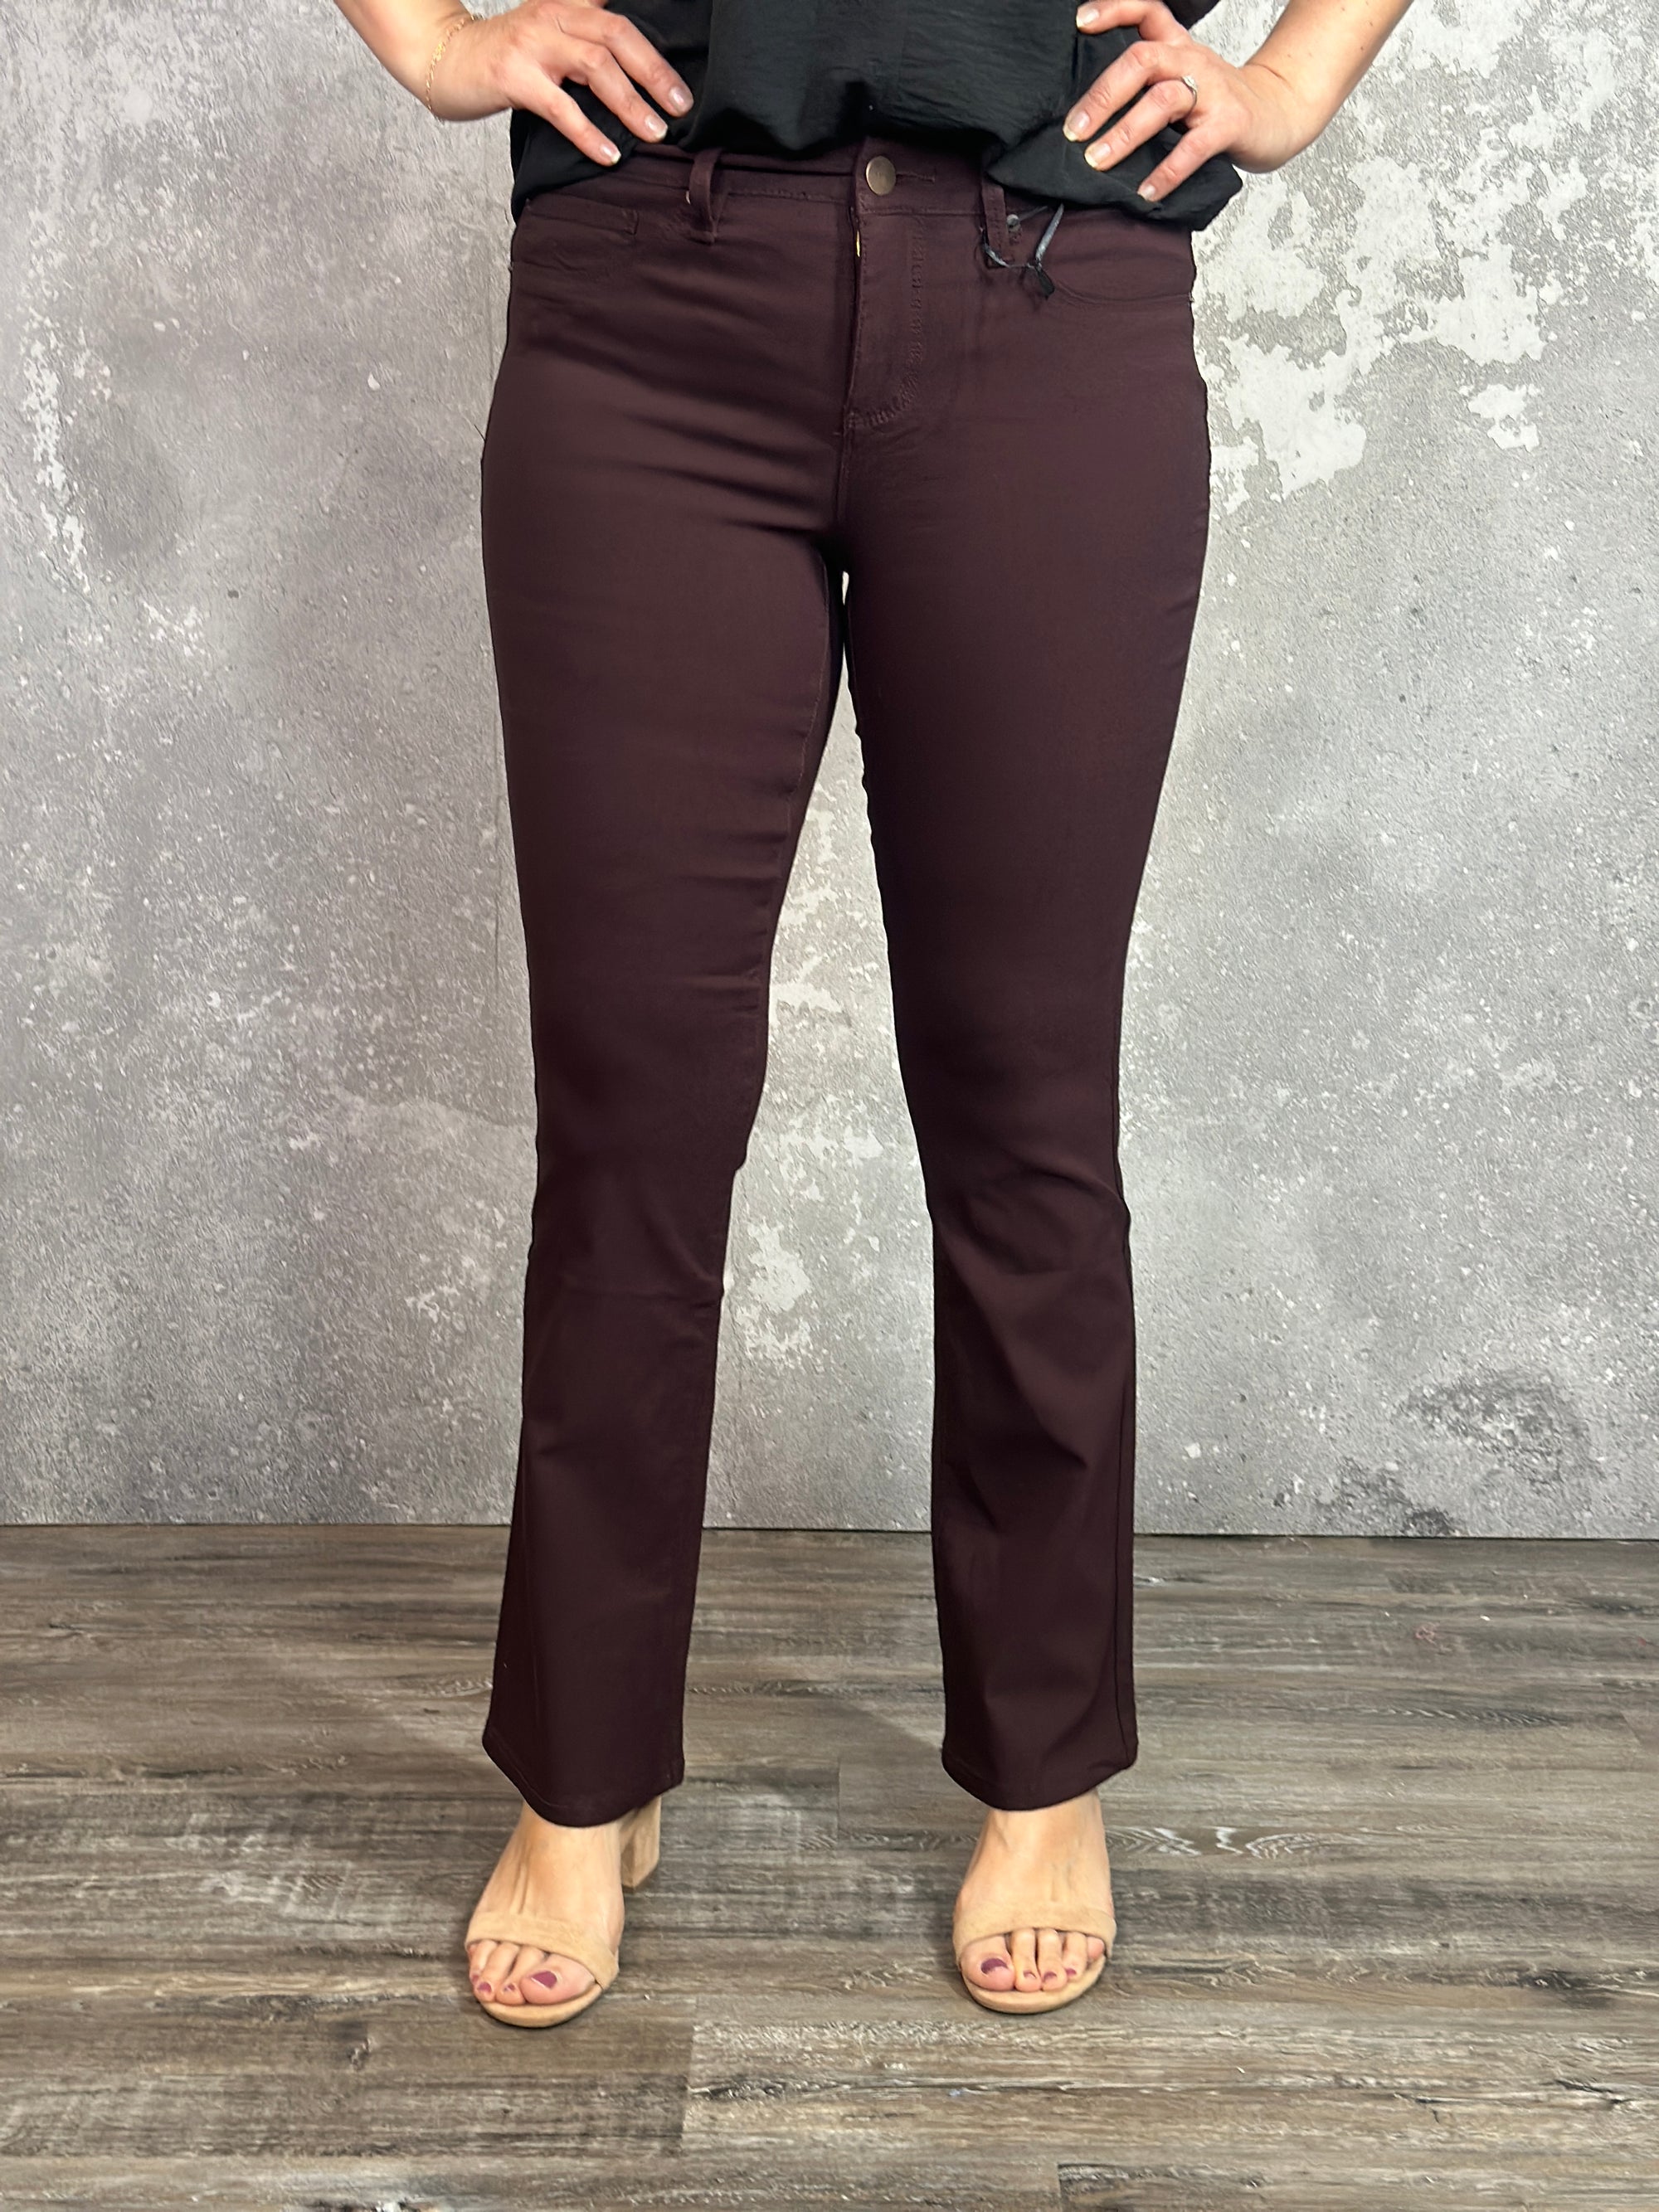 Hyperstretch Relaxed BootCut Pant - Dark Berry (Small - XL)